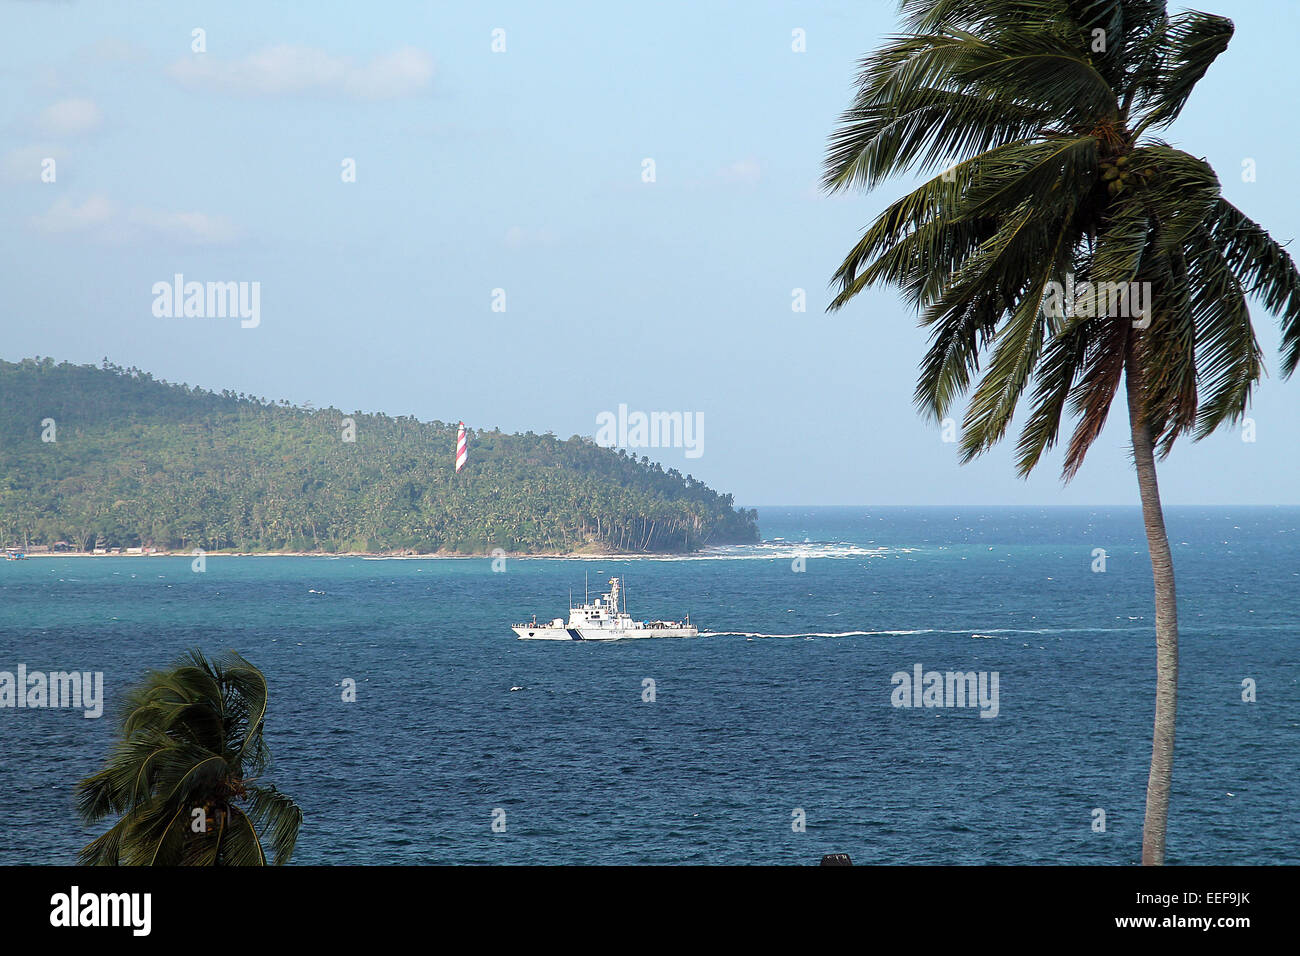 PORT BLAIR - 31 DECEMBER: An Indian coast guard ship returns to Port Blair from an exercise on december 31, 2014 in the Andaman and Nicobar islands. Stock Photo